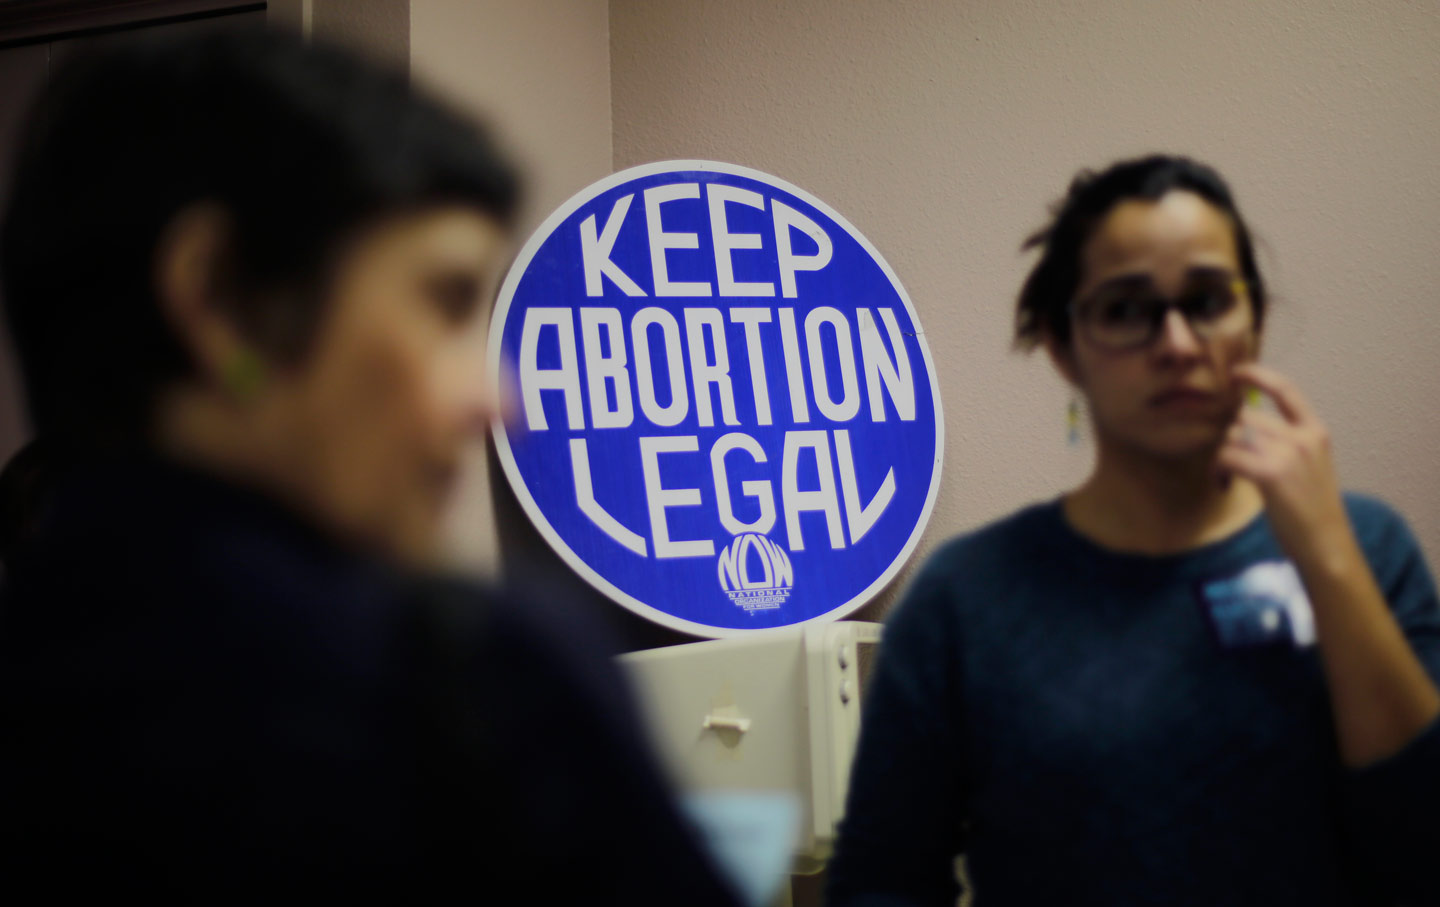 Abortion case goes to Supreme Court: 5 things to know